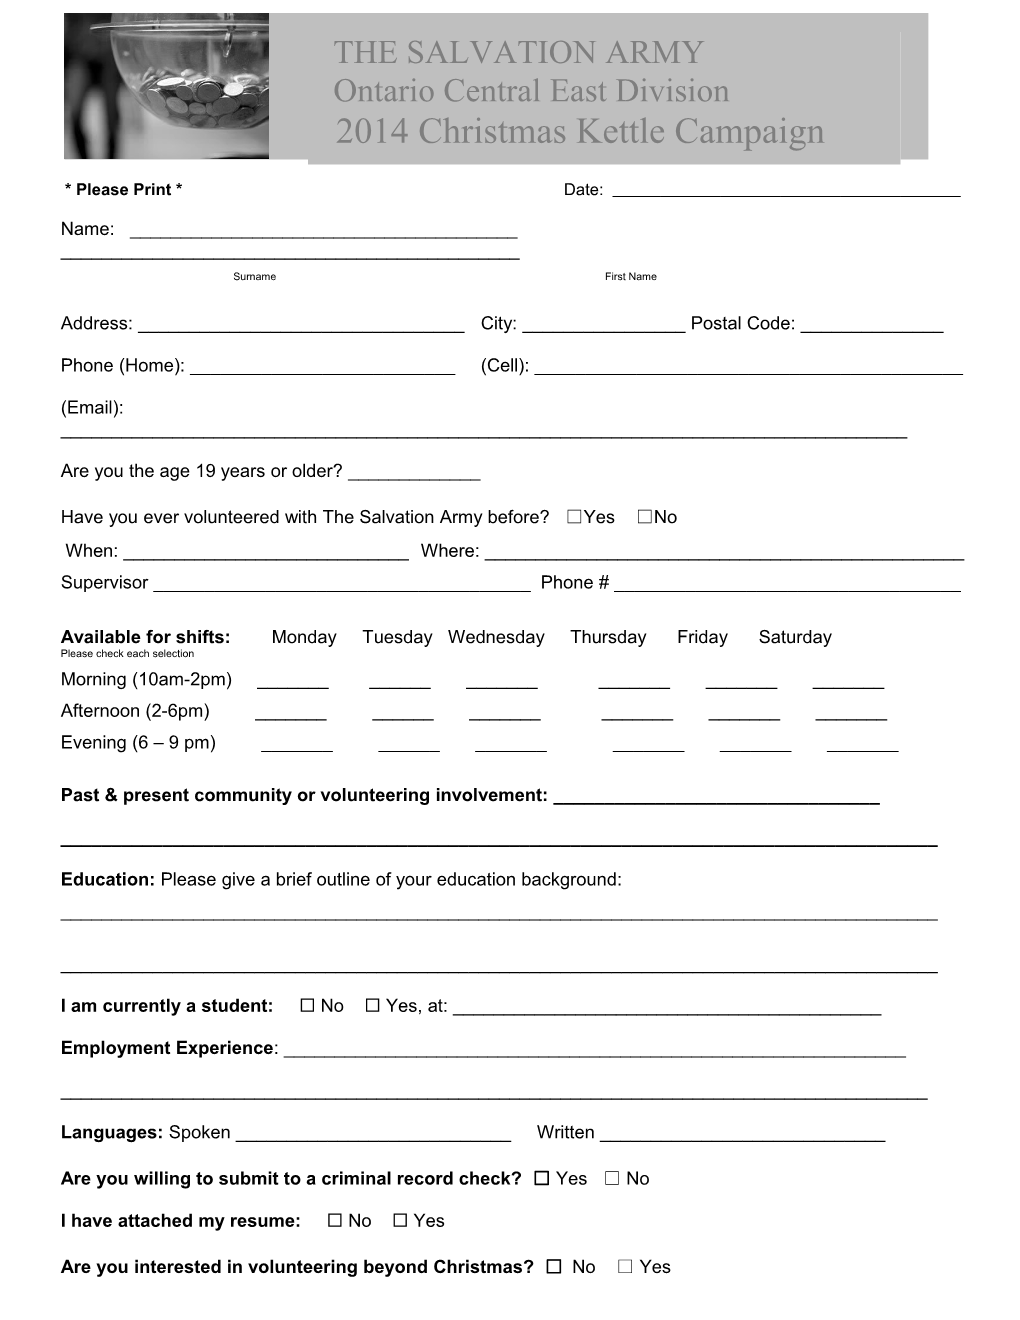 Annual Christmas Kettle Worker Application Form